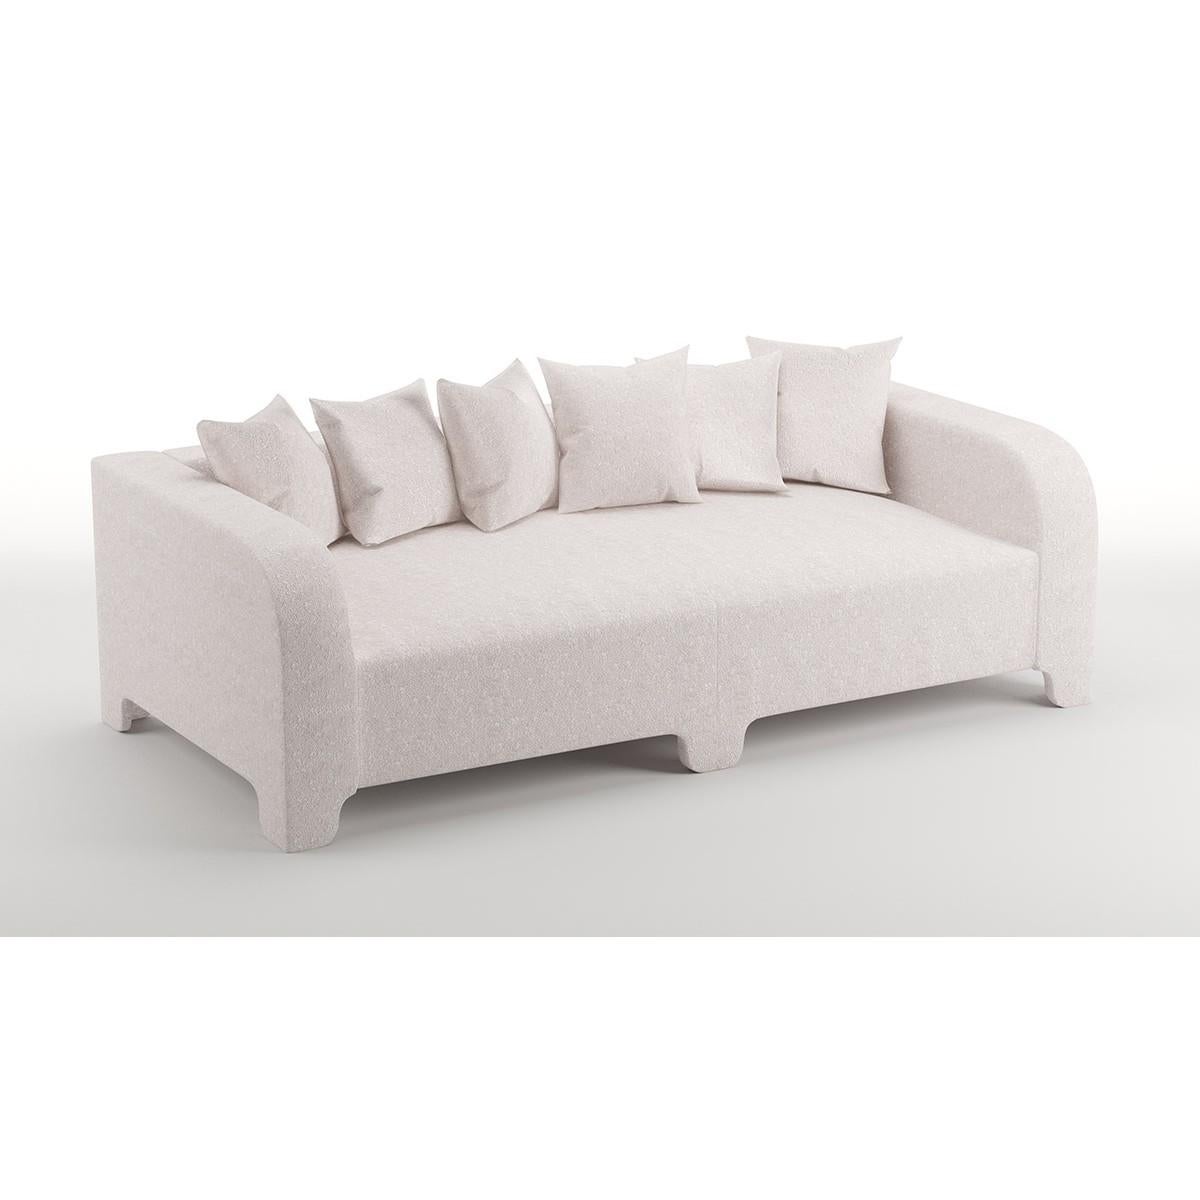 Popus Editions Graziella 3 Seater Sofa in Duna Venice Chenille Velvet Fabric

A foot that hides another. A cushion that hides another. A curve that hides another with contemporary lines and a base like a punctuation mark, this sofa gives pride of